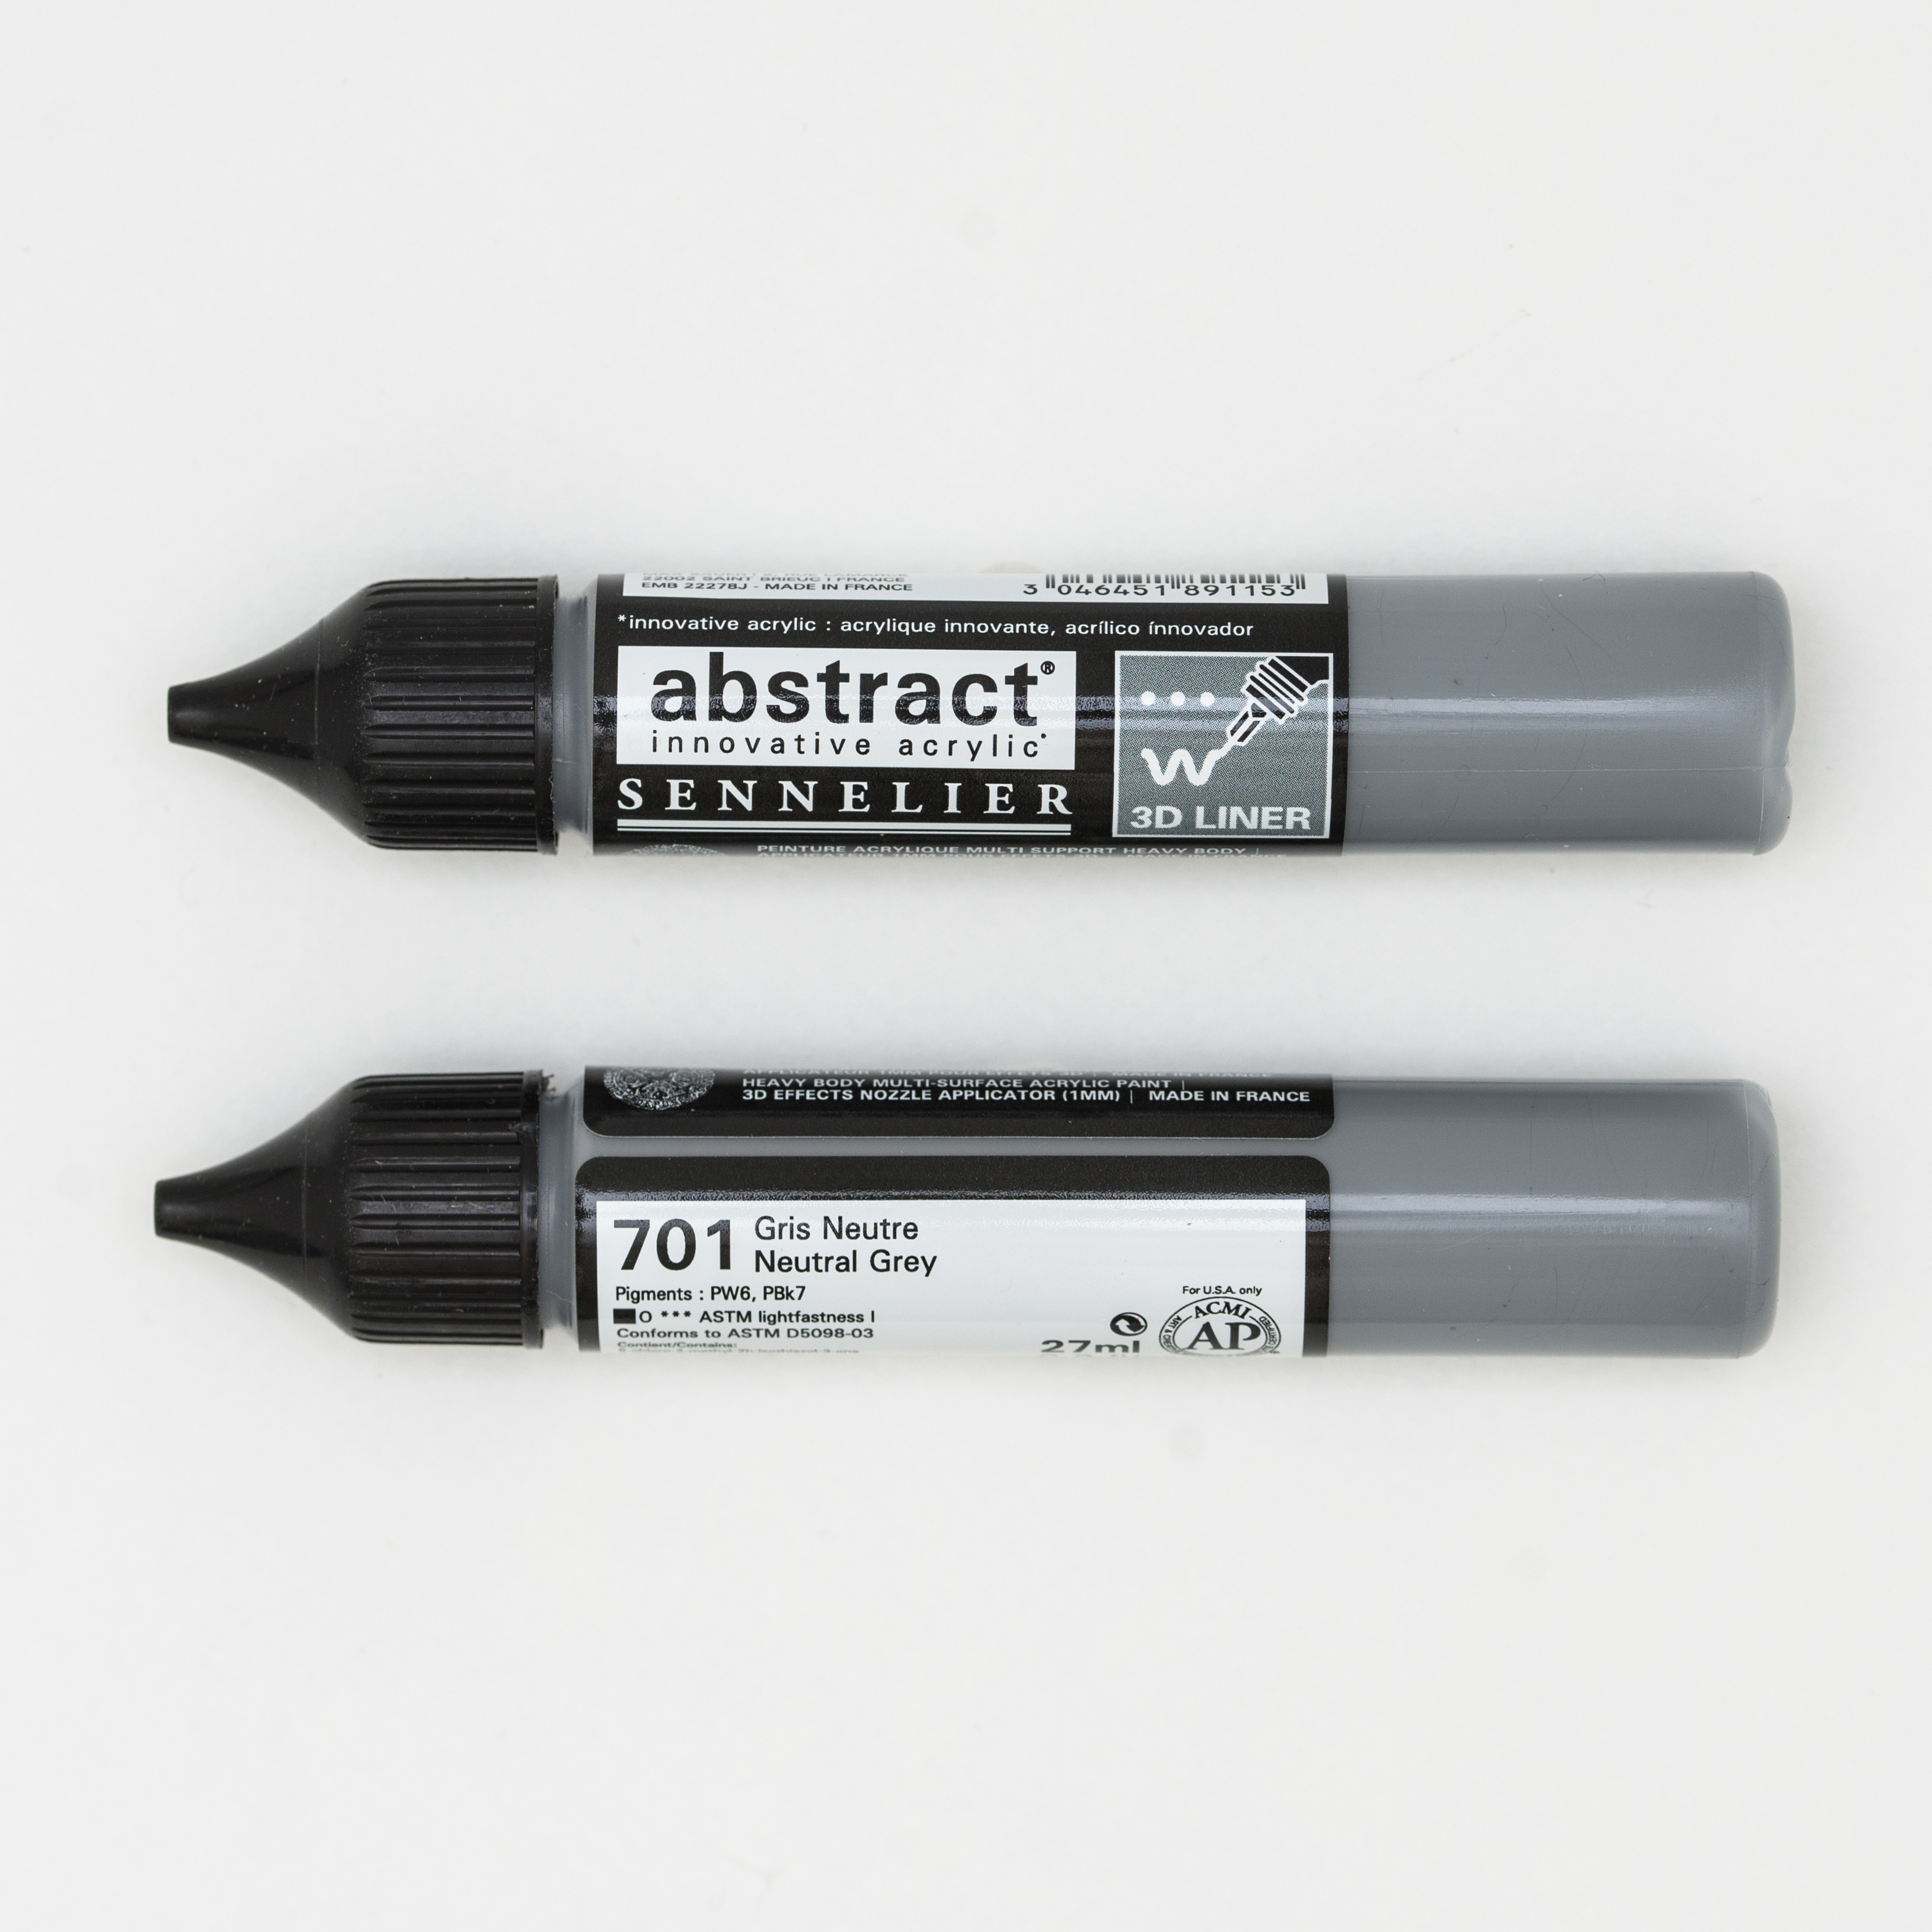 Sennelier Abstract Liners 27ml